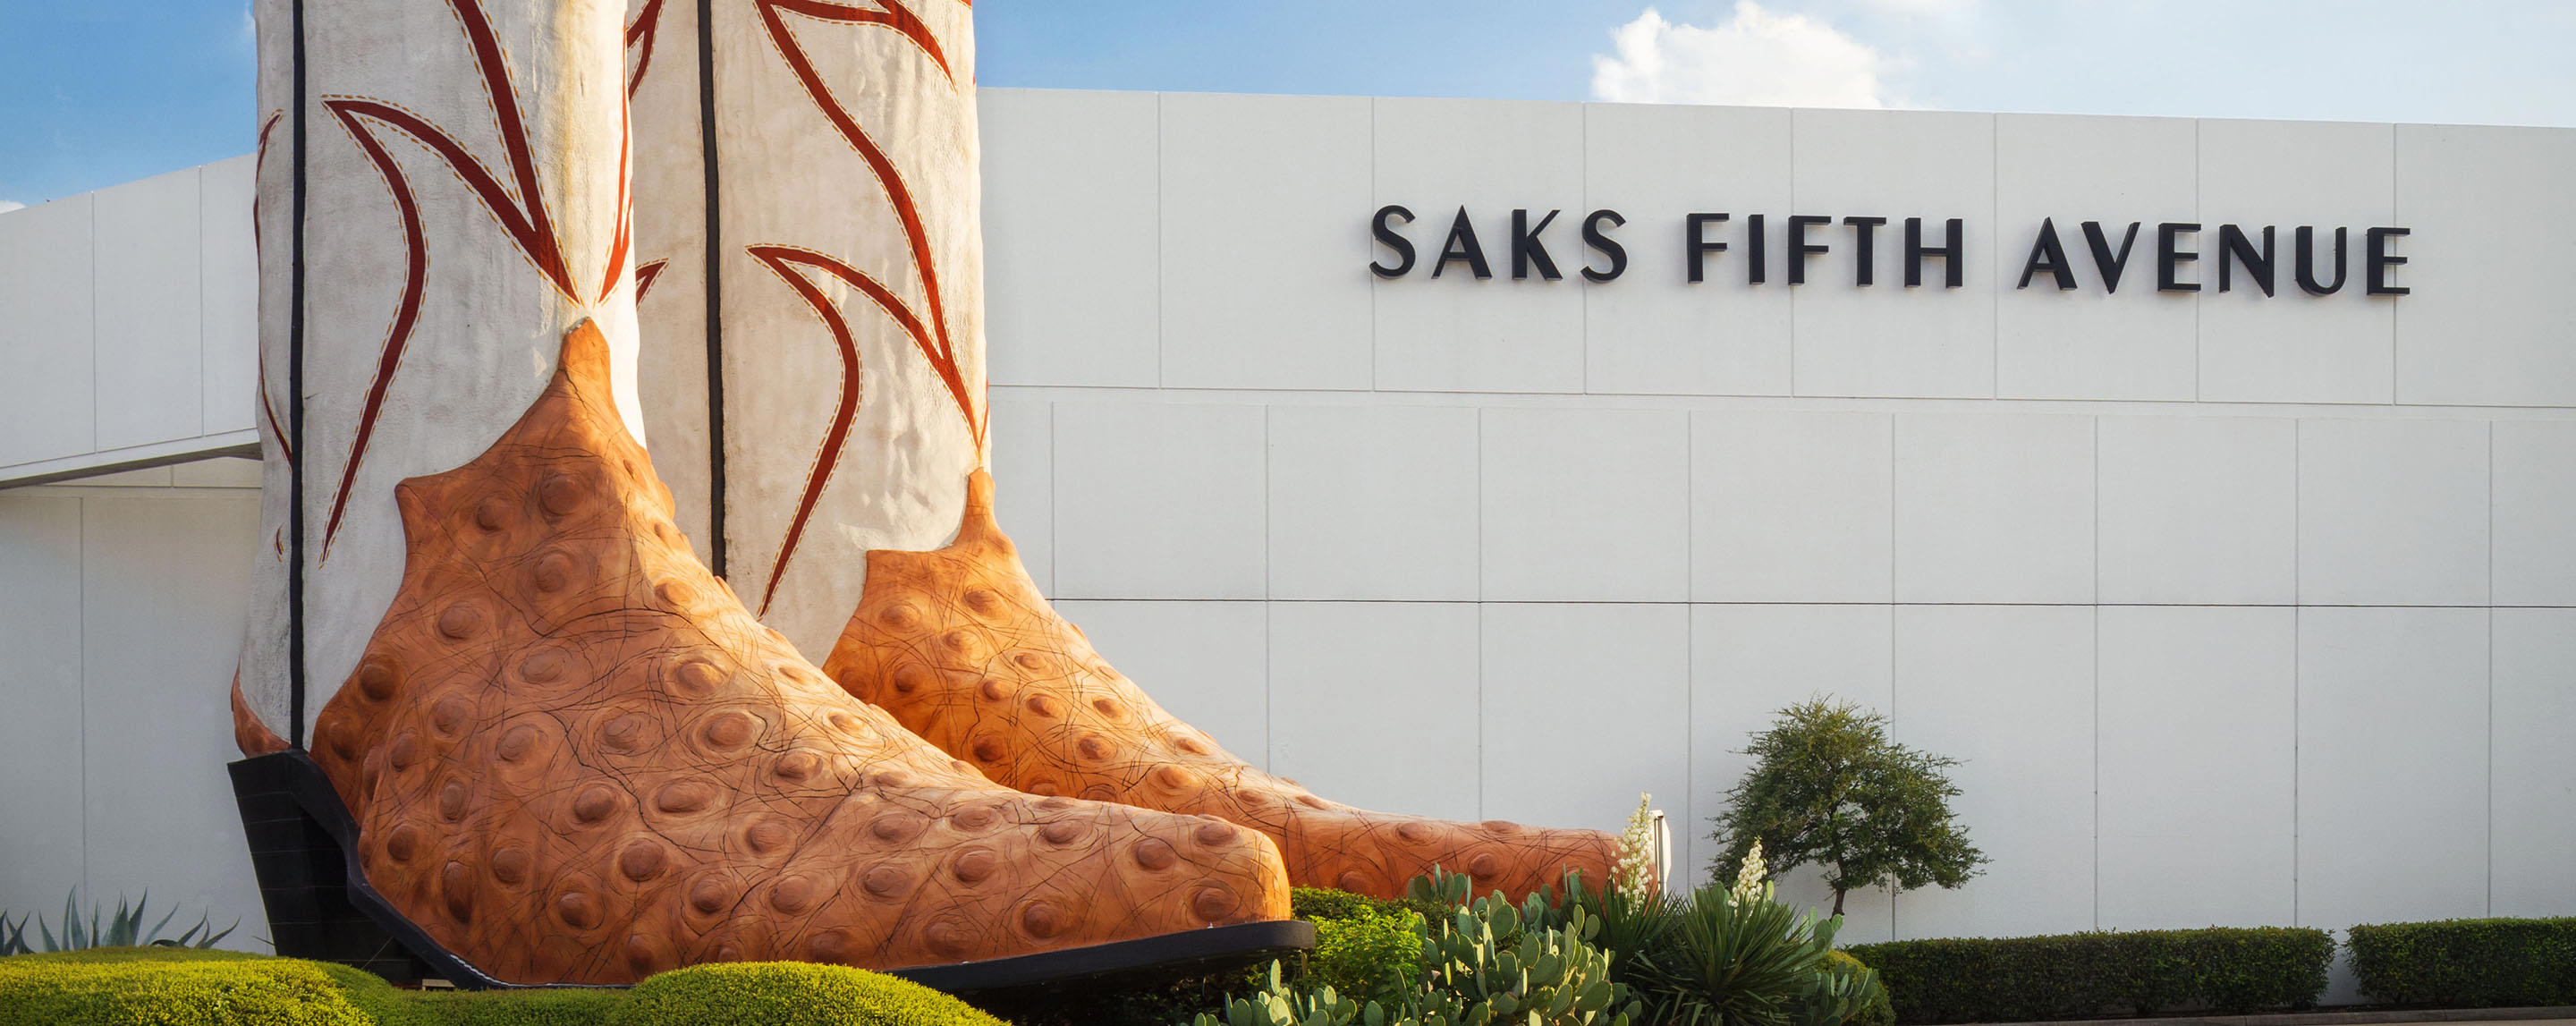 A pair of large boots sits in the foliage near a Saks Fifth Avenue building.